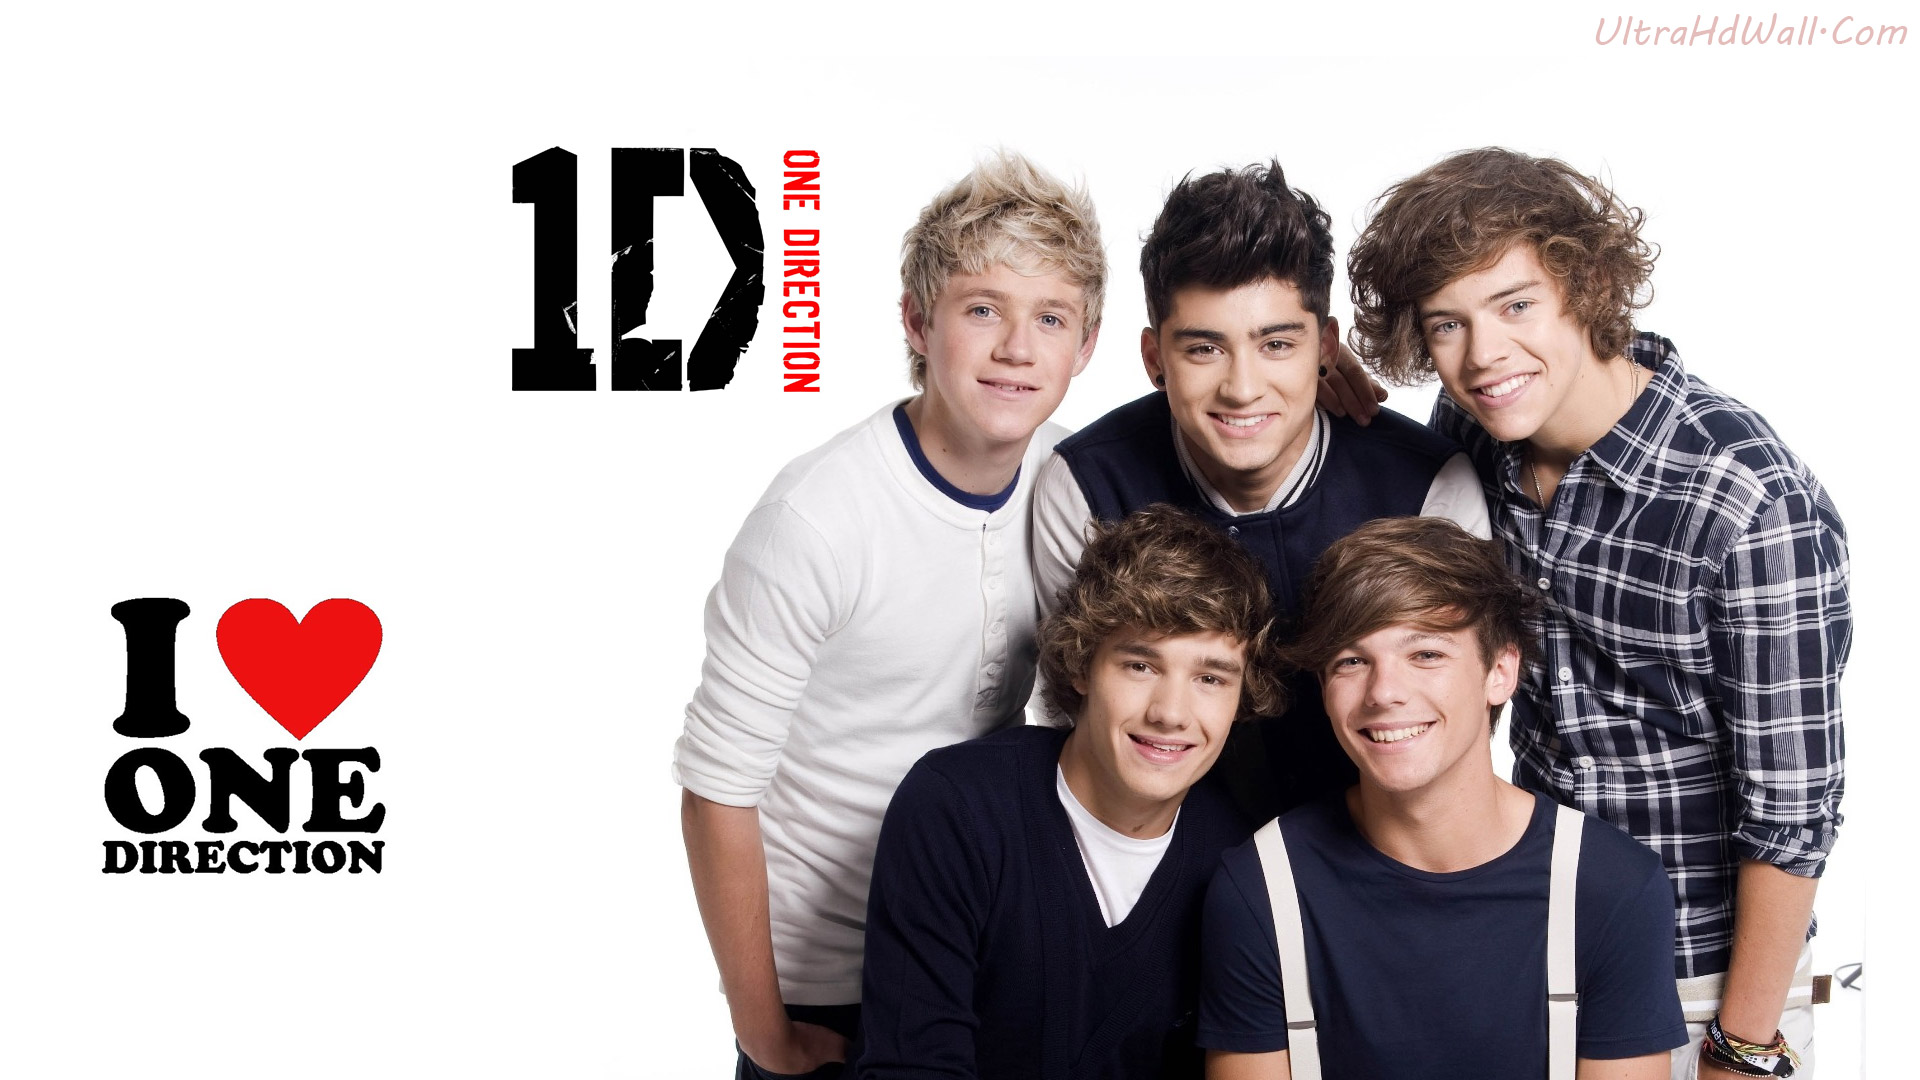 One Direction Wallpaper 1920x1080